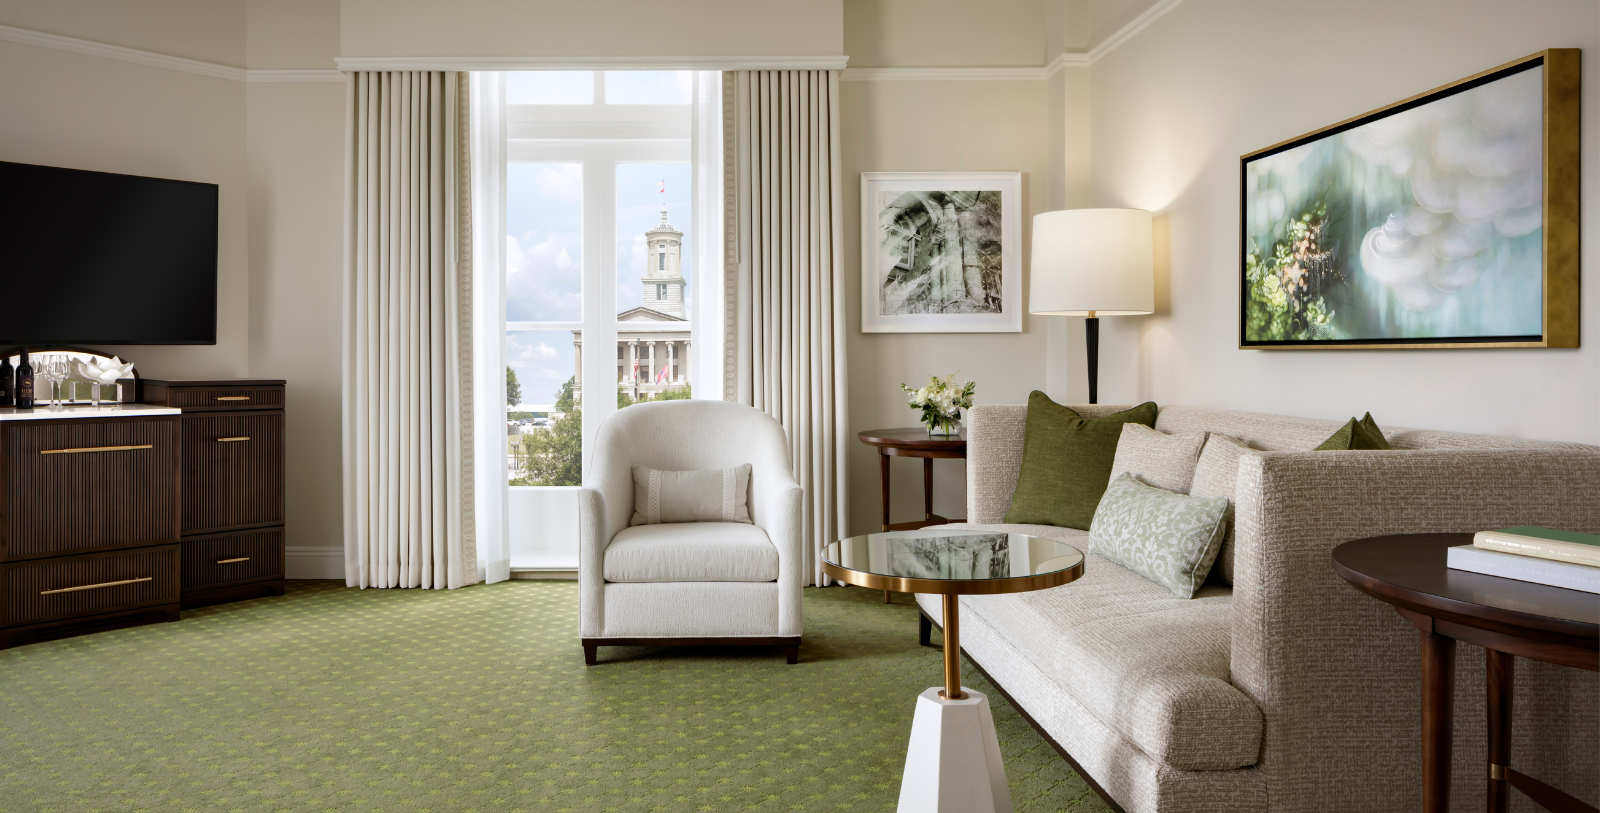 Image of Sitting Area of Studio Suite at The Hermitage Hotel, a member of Historic Hotels of America since 1996, located in Nashville, Tennessee